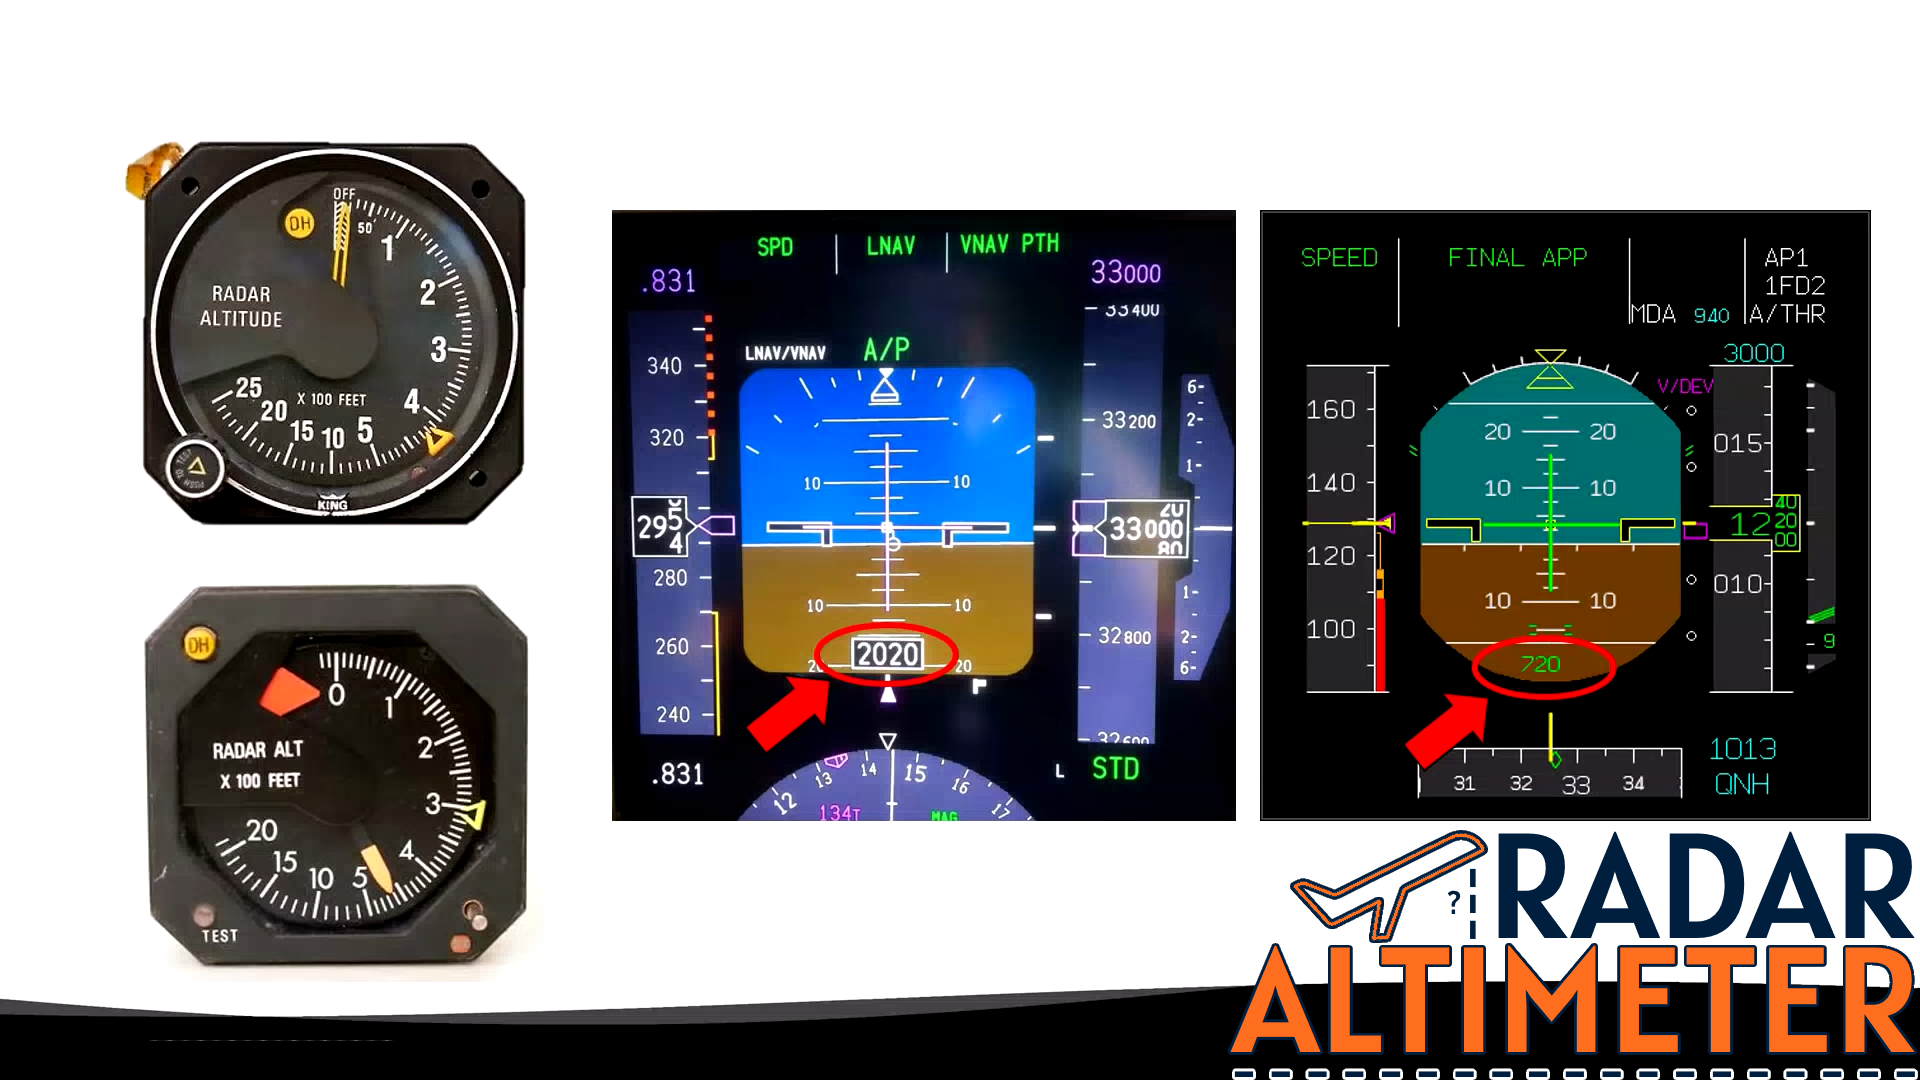 Radar Altimeter altitude indicators can also appear electronically. You can see images of these indicators in the pictures below.